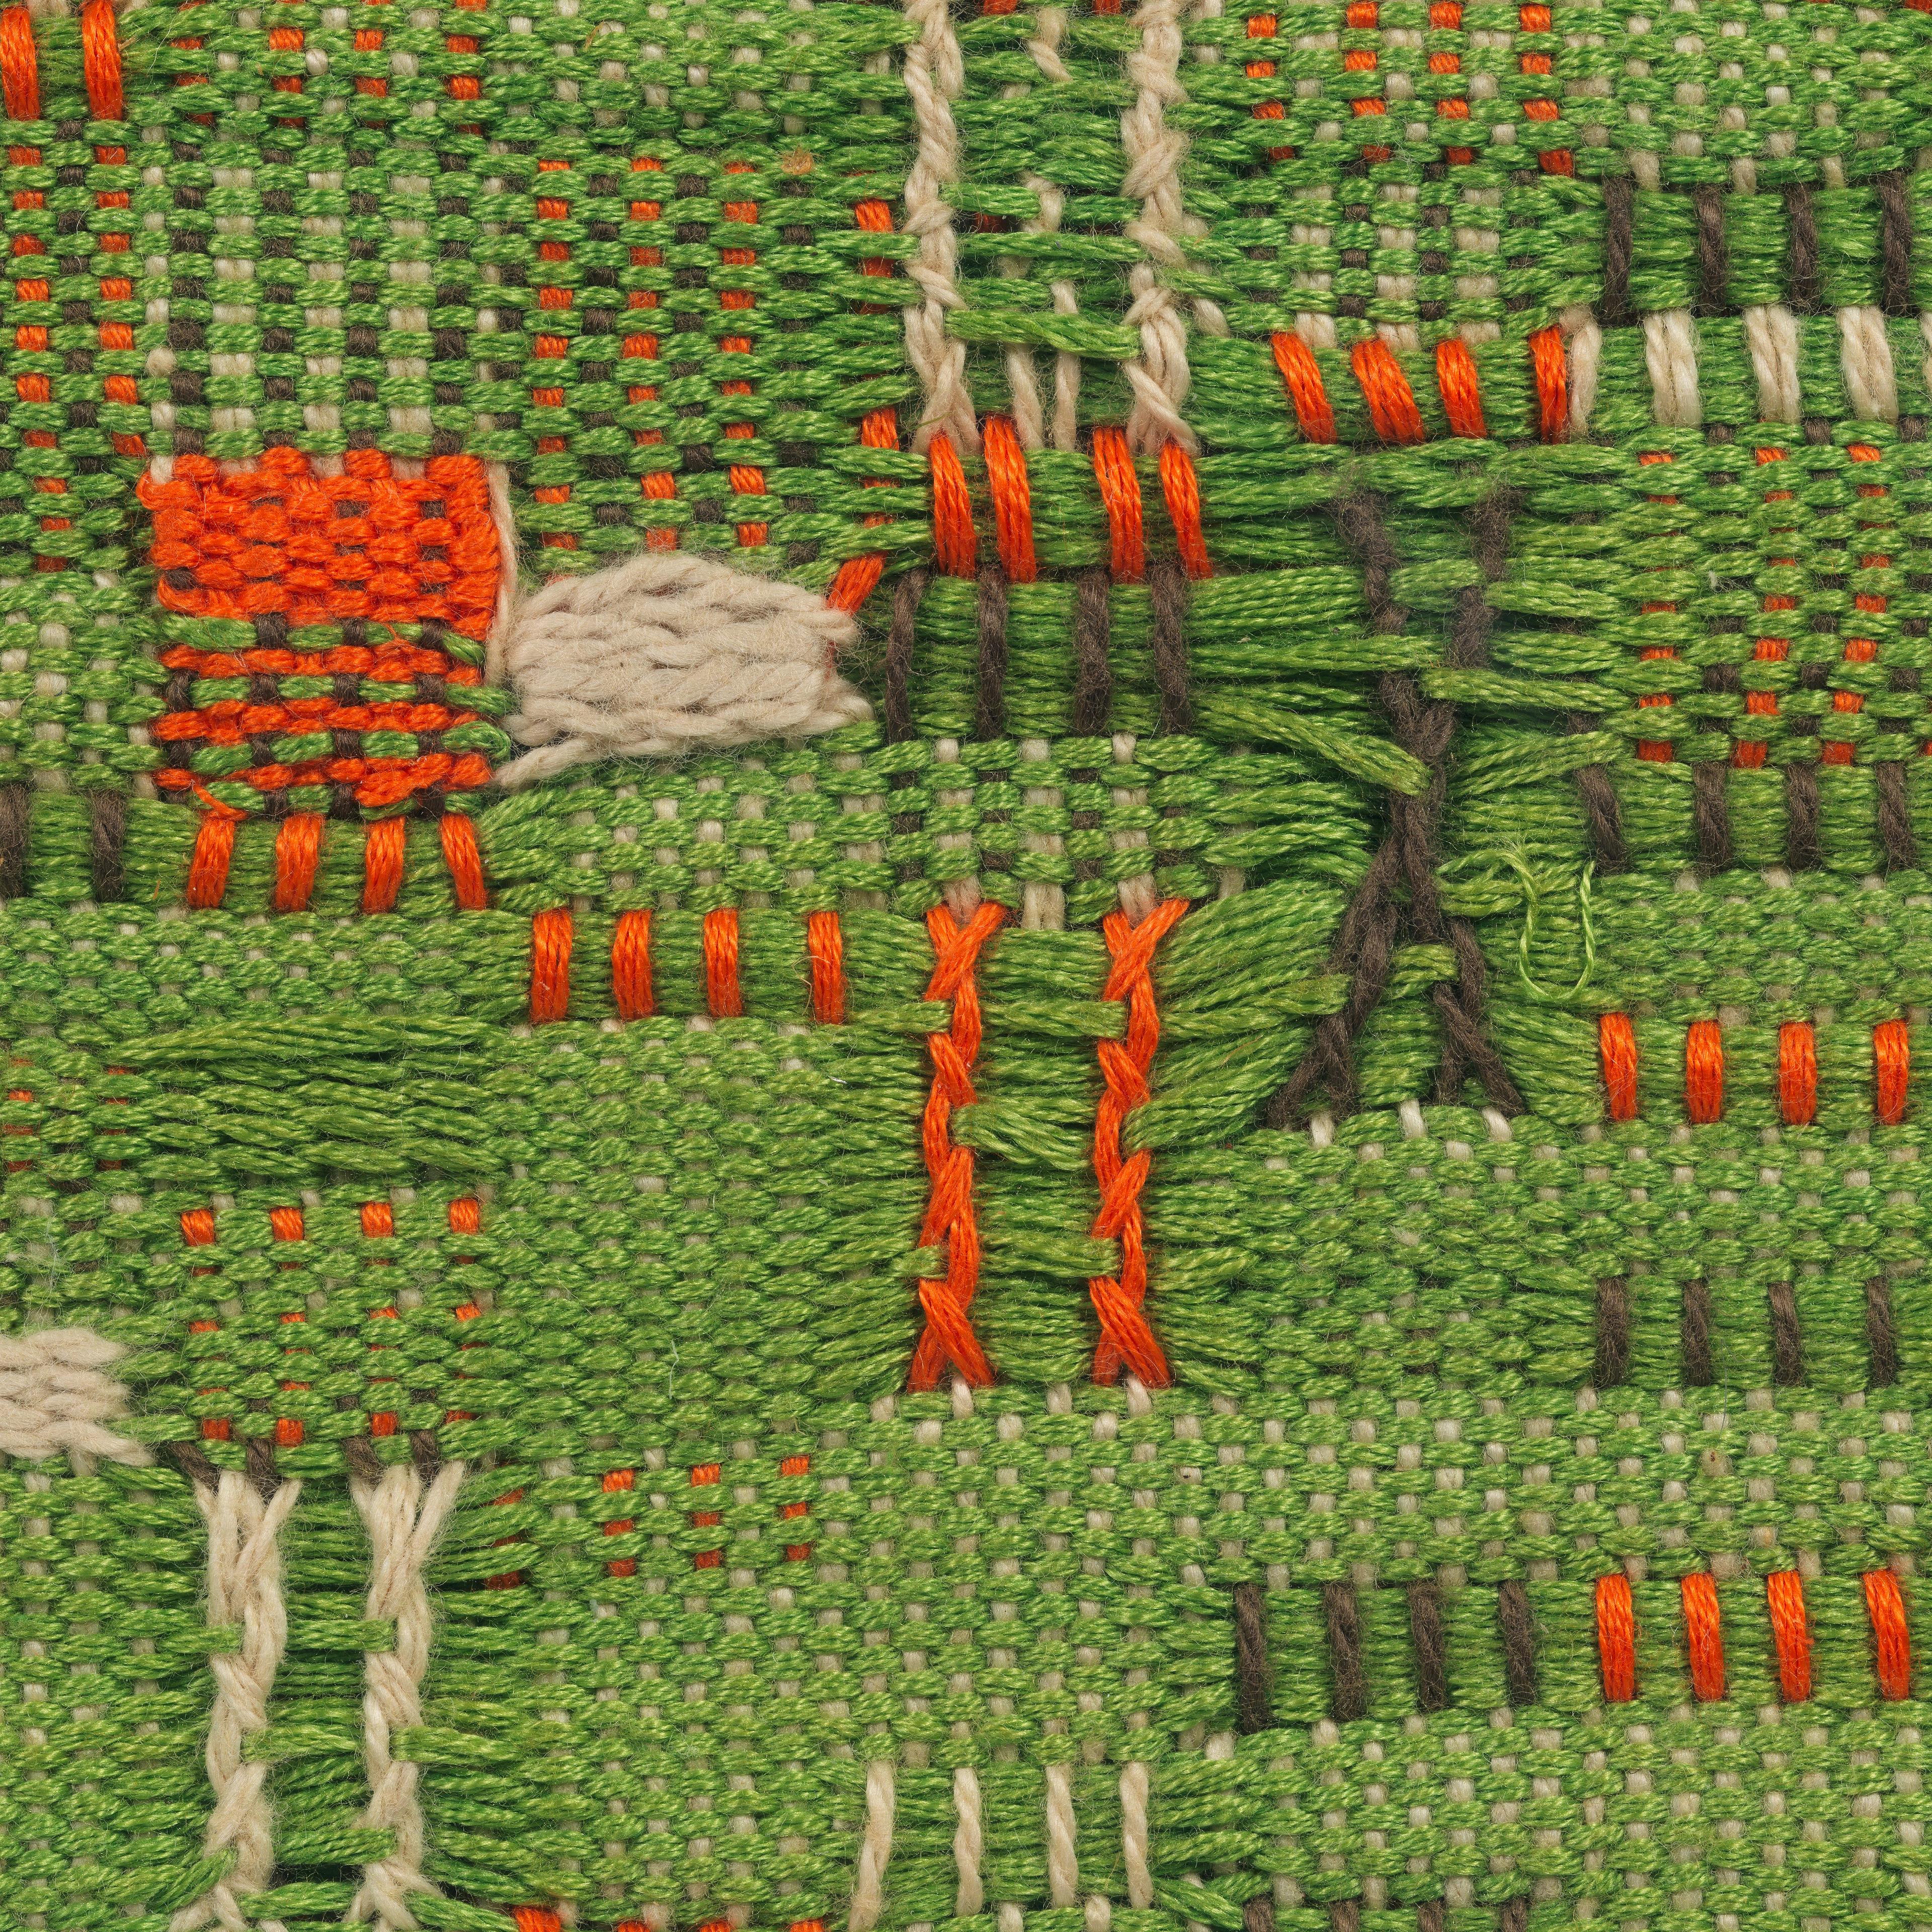 Weaving of mixed colors: green, orange, black, and white.